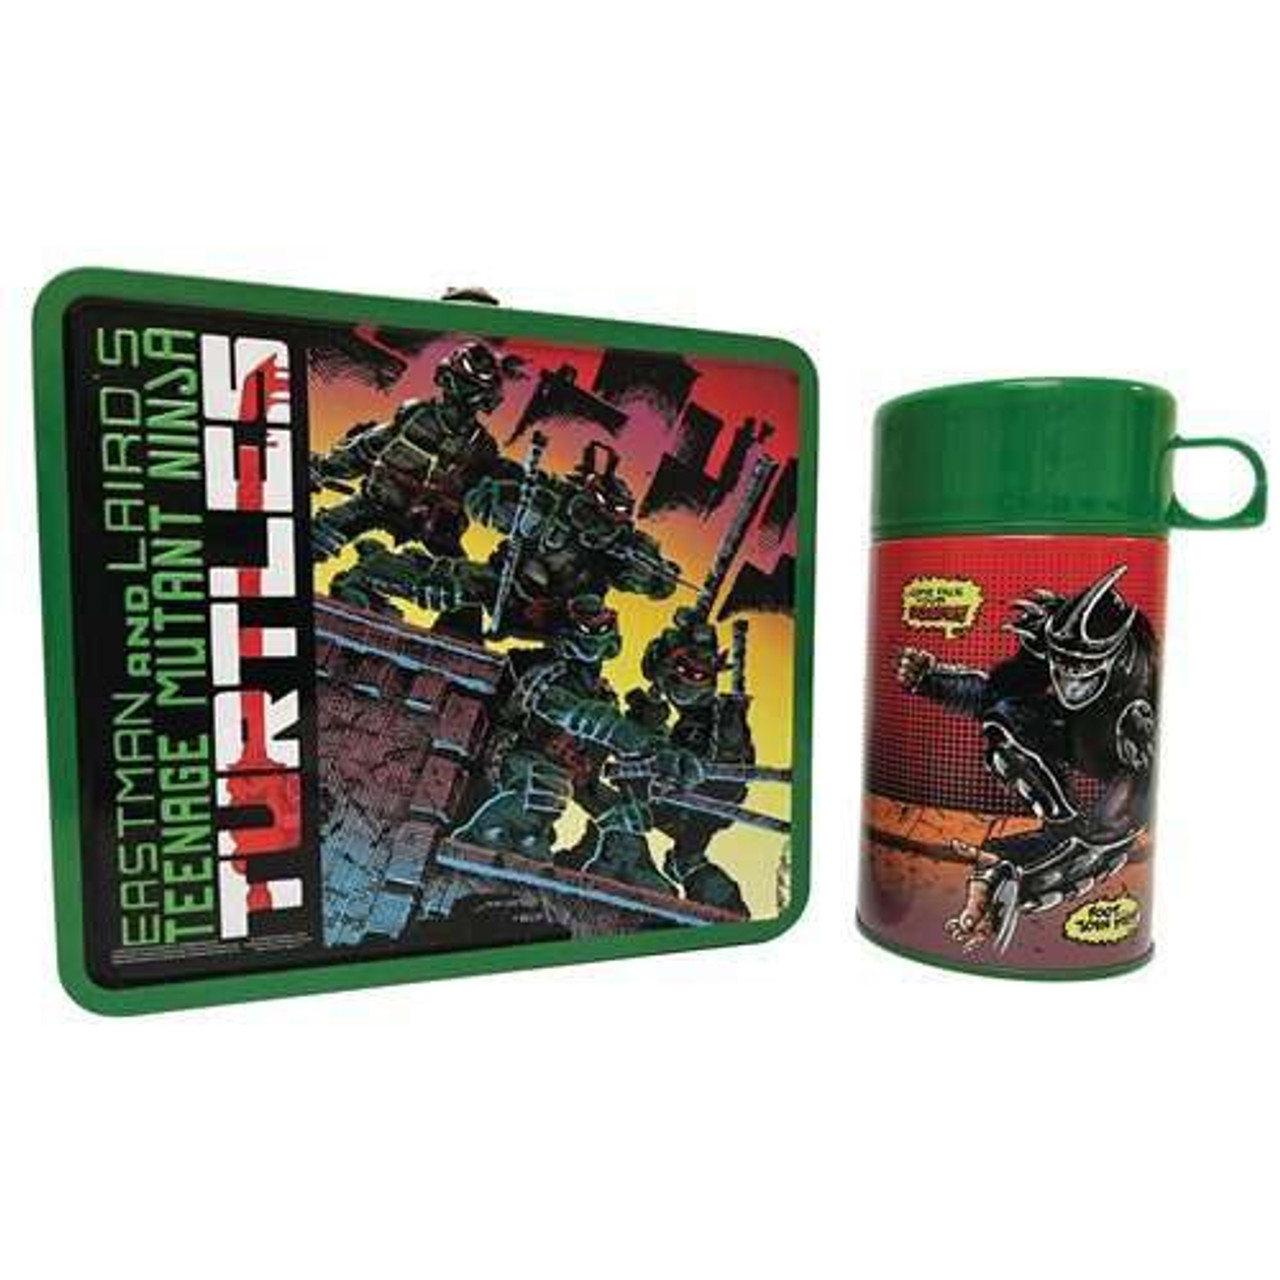 https://cdn11.bigcommerce.com/s-8j9ytfqbd1/images/stencil/1280x1280/products/384/5566/TMNT-Classic-Comic-1-Lunchbox-with-Thermos-Previews-Exclusive-PX_1203__92173.1687285355.jpg?c=1?imbypass=on